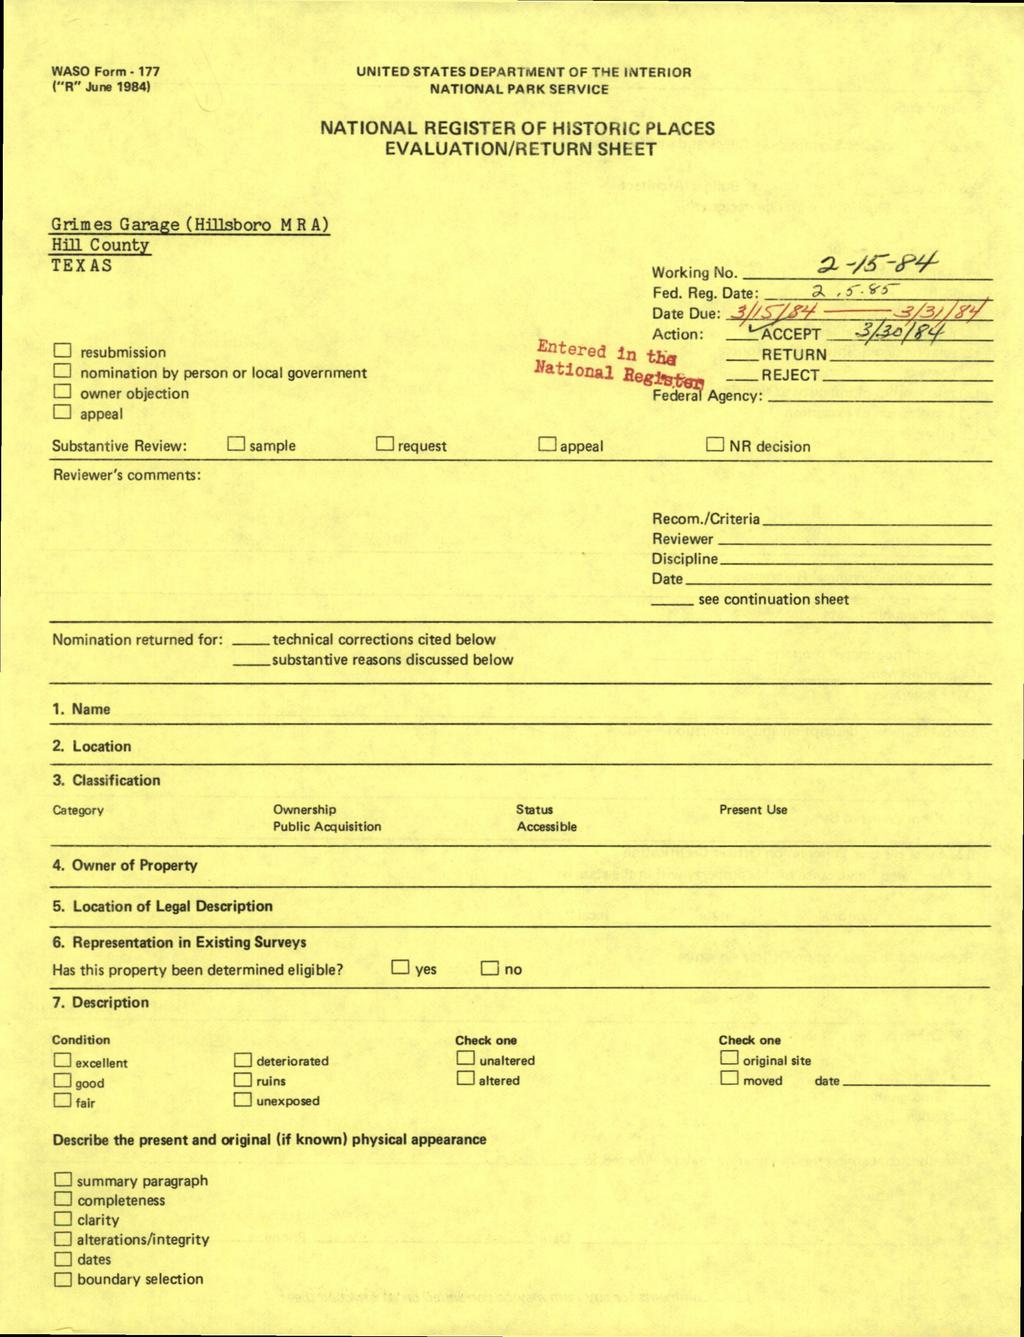 WASO Form - 177 ("R" June 1984) UNITED STATES DEPARTWIENT OF THE INTERIOR NATIONAL PARK SERVICE NATIONAL REGISTER OF HISTORIC PLACES EVALUATION/RETURN SHEET Grimes Garage (Hillsboro MRA) HUl County